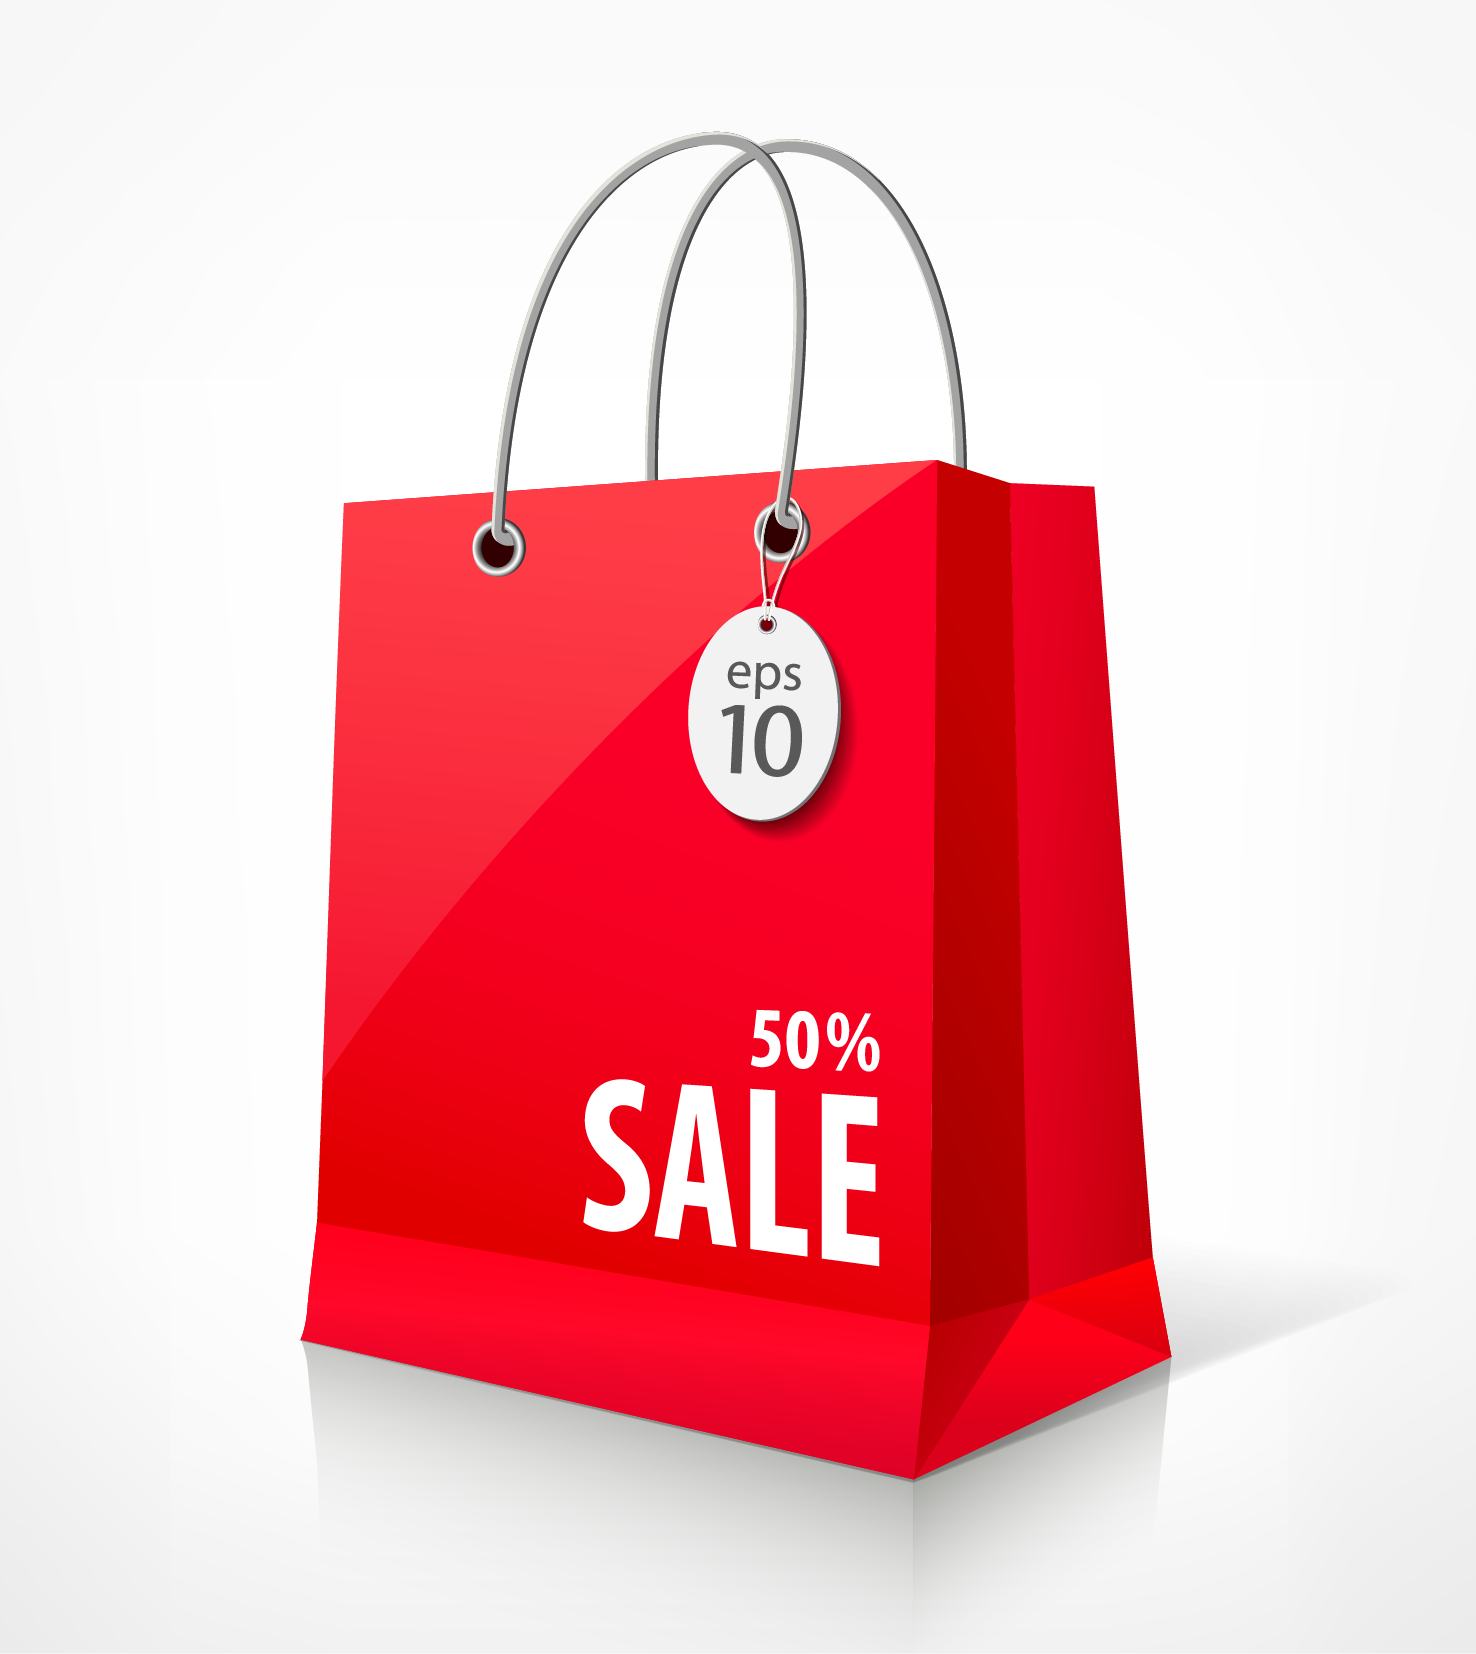 Shopping Bags Clipart - 49 cliparts